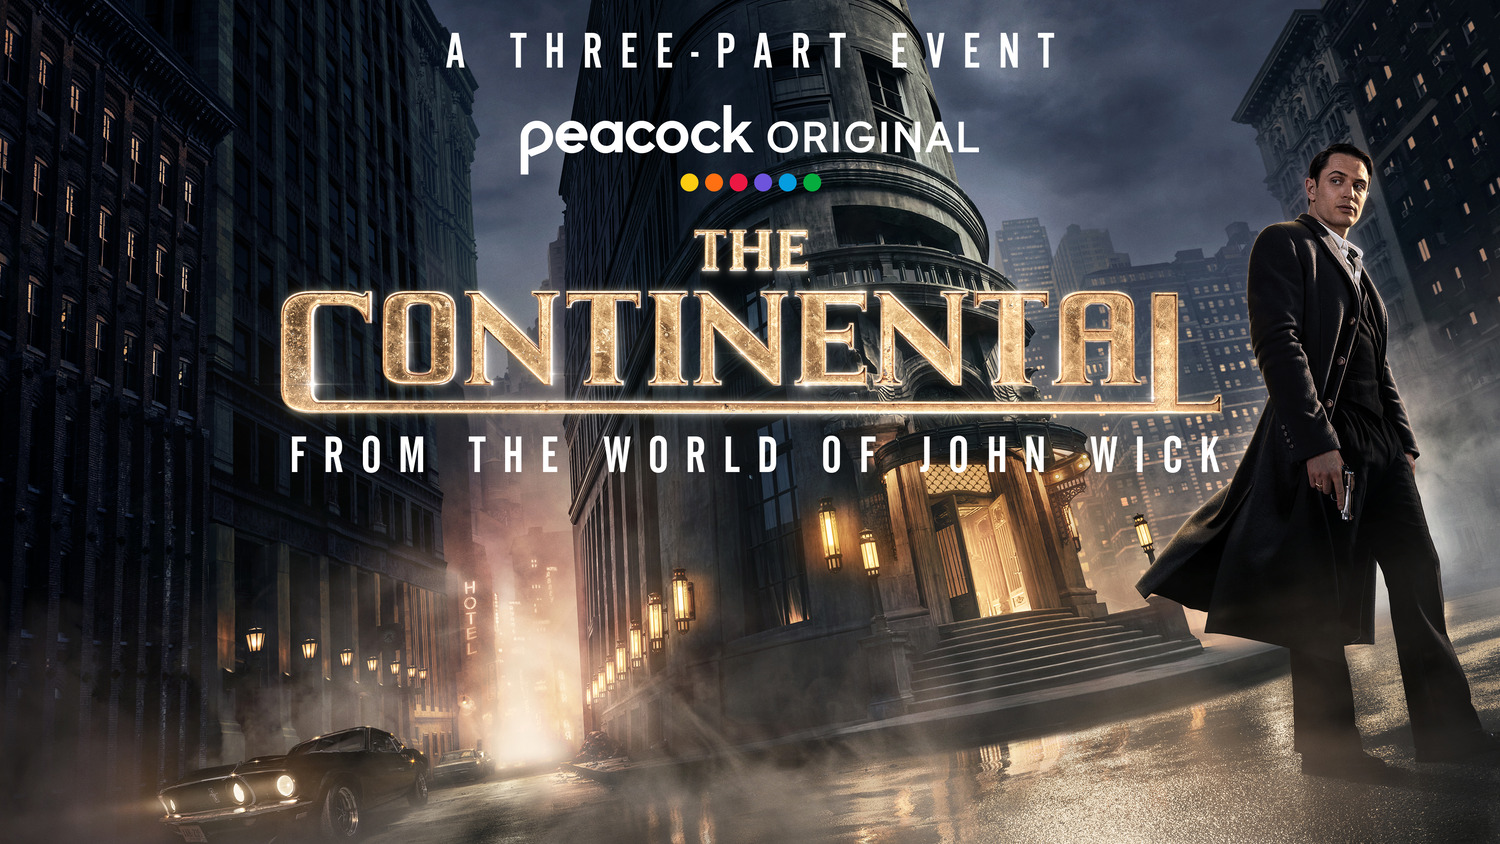 Extra Large TV Poster Image for The Continental (#4 of 6)